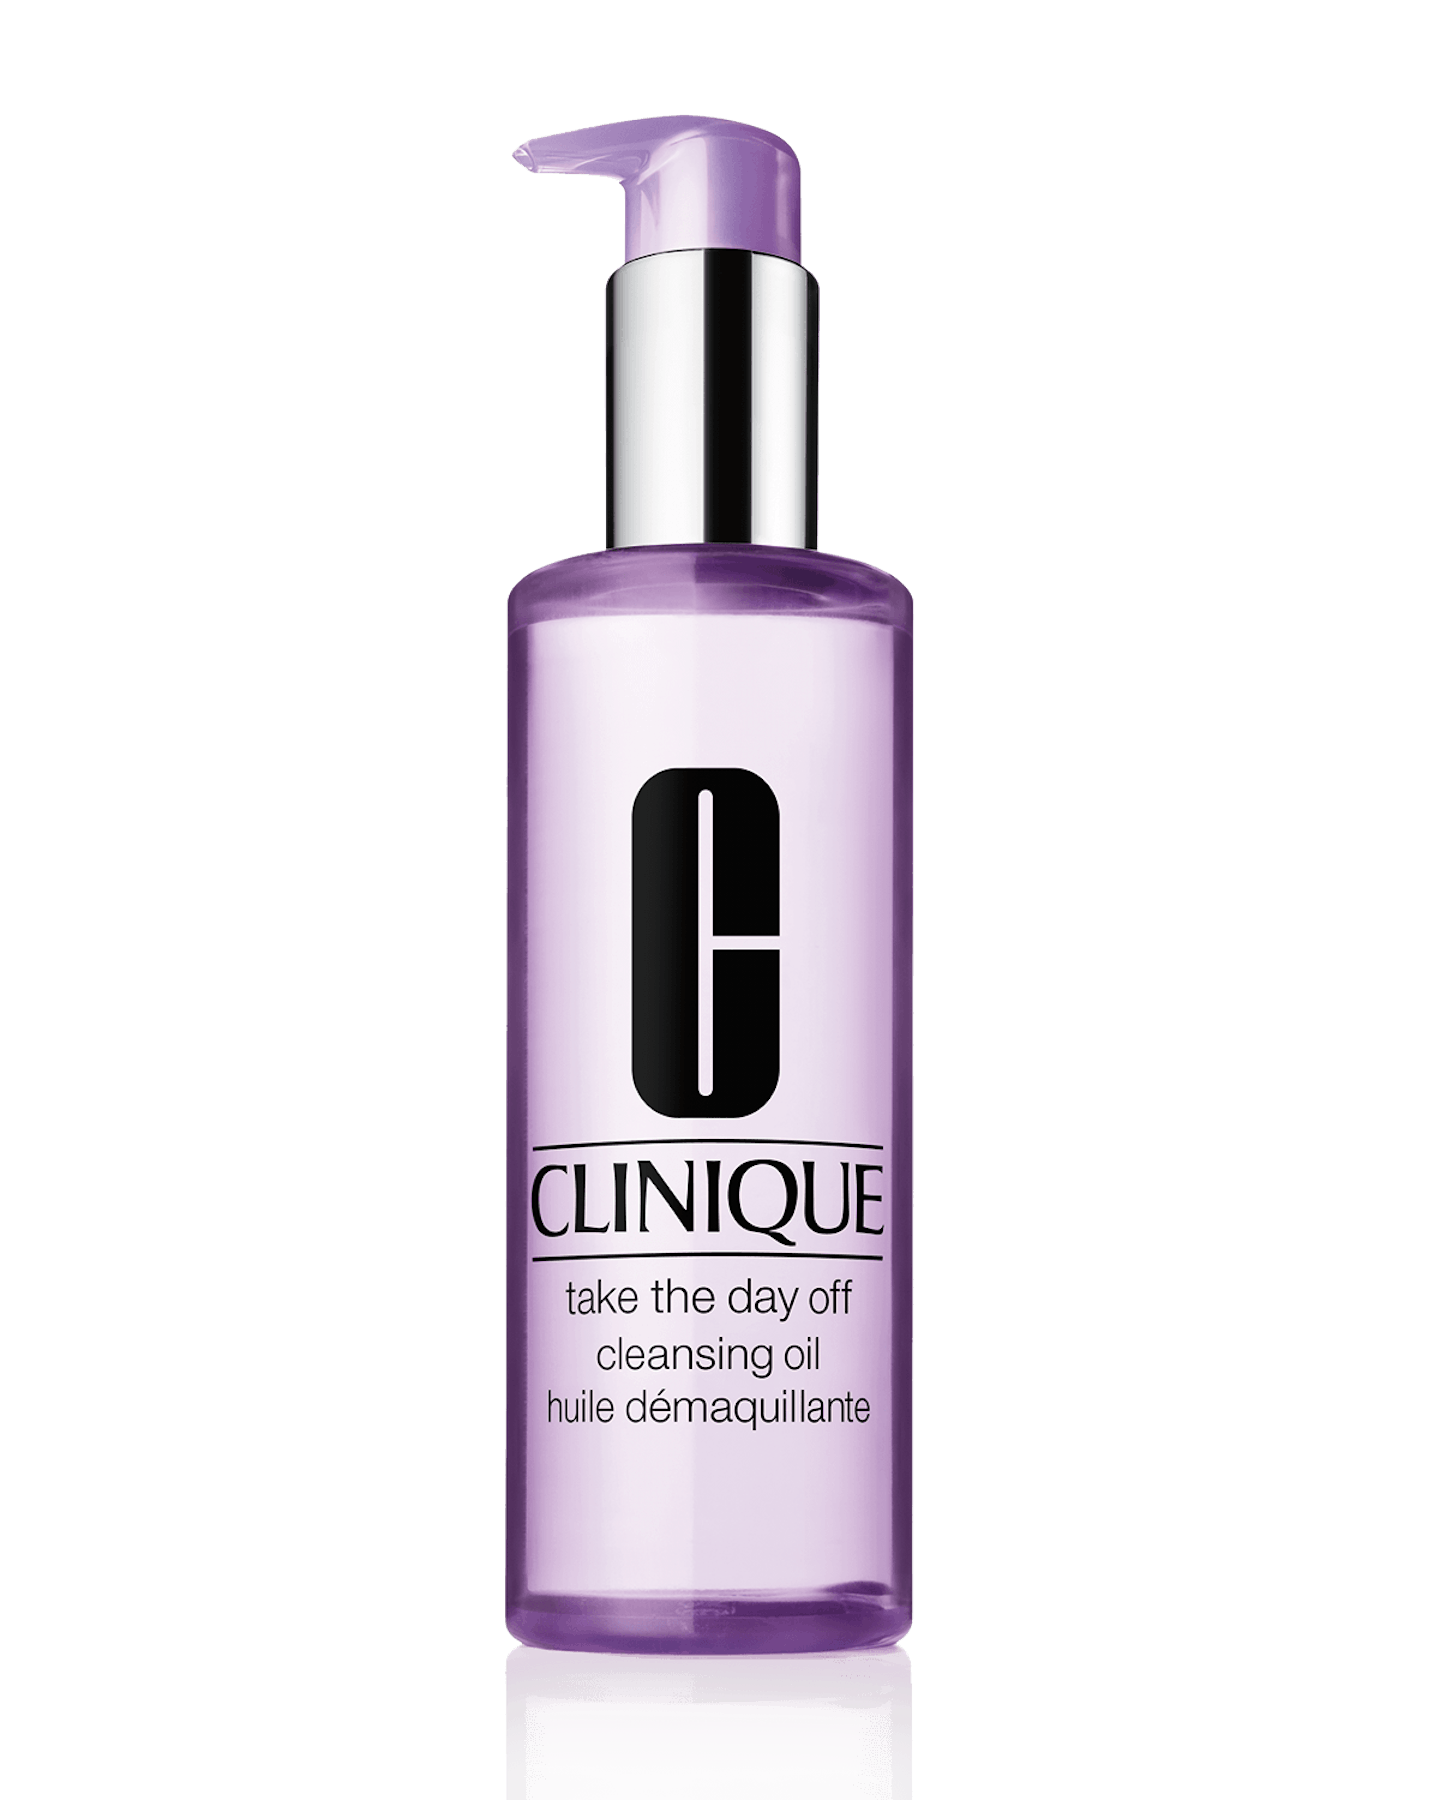 Clinique,Take The Day Off Cleansing Oil